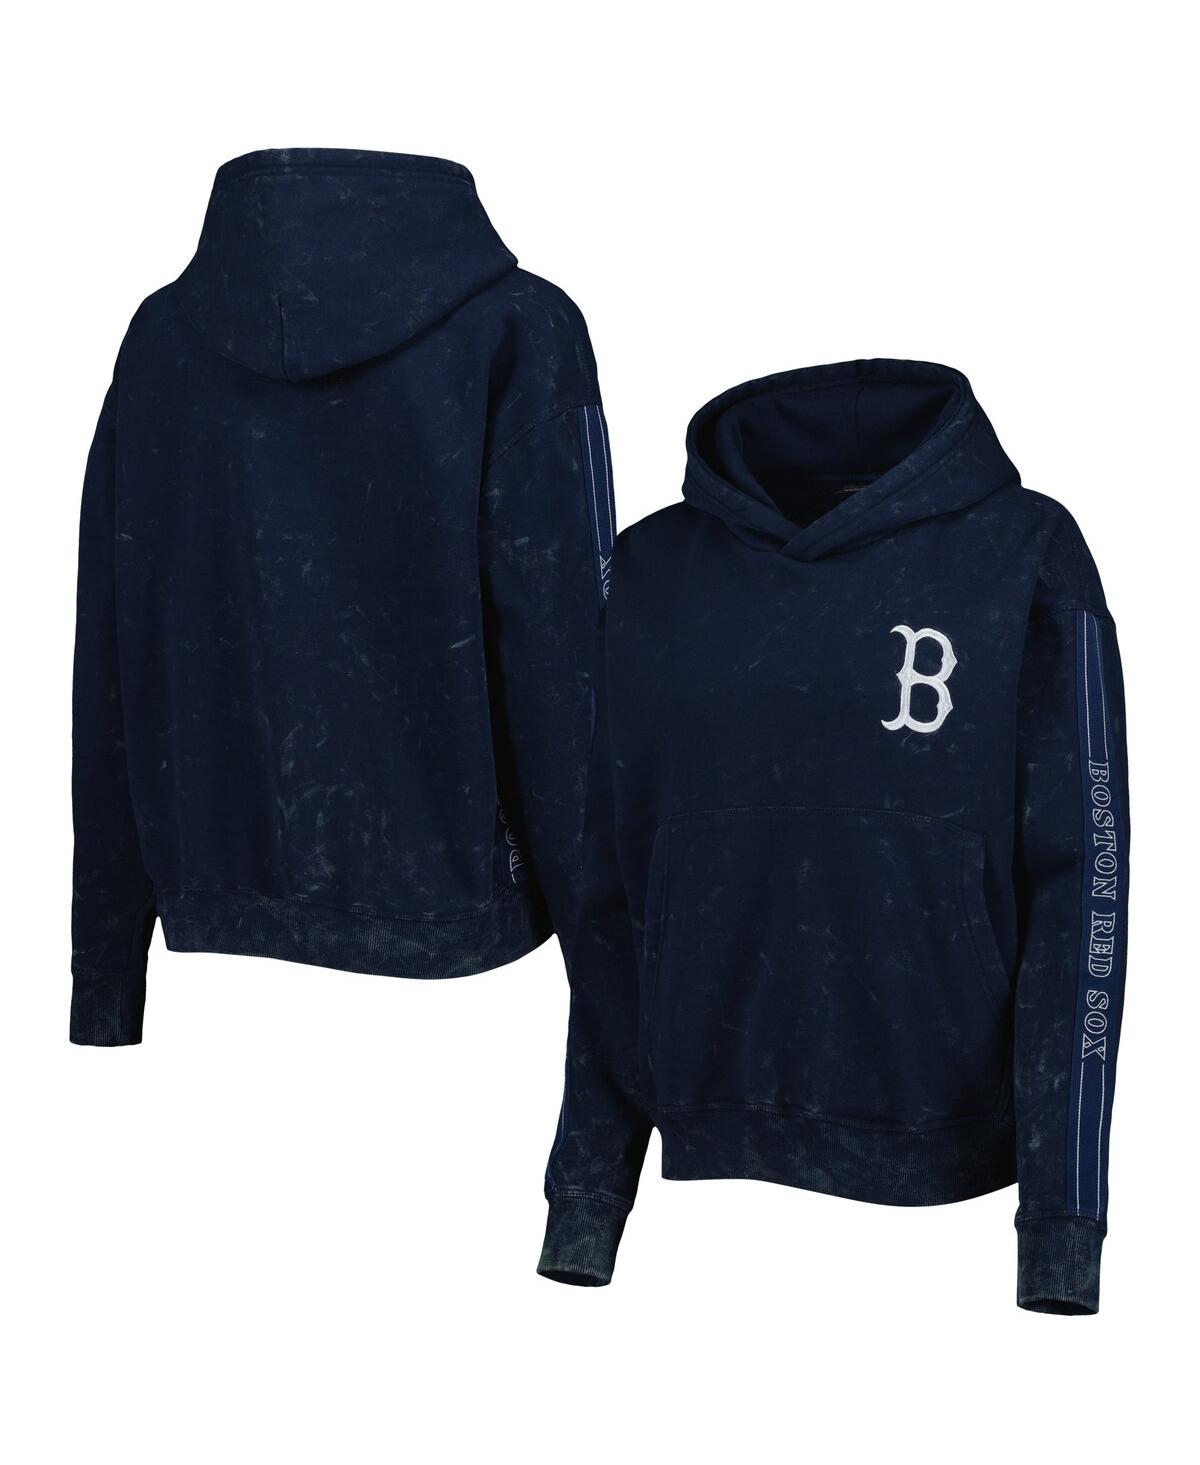 THE WILD COLLECTIVE WOMEN'S THE WILD COLLECTIVE NAVY BOSTON RED SOX MARBLE PULLOVER HOODIE